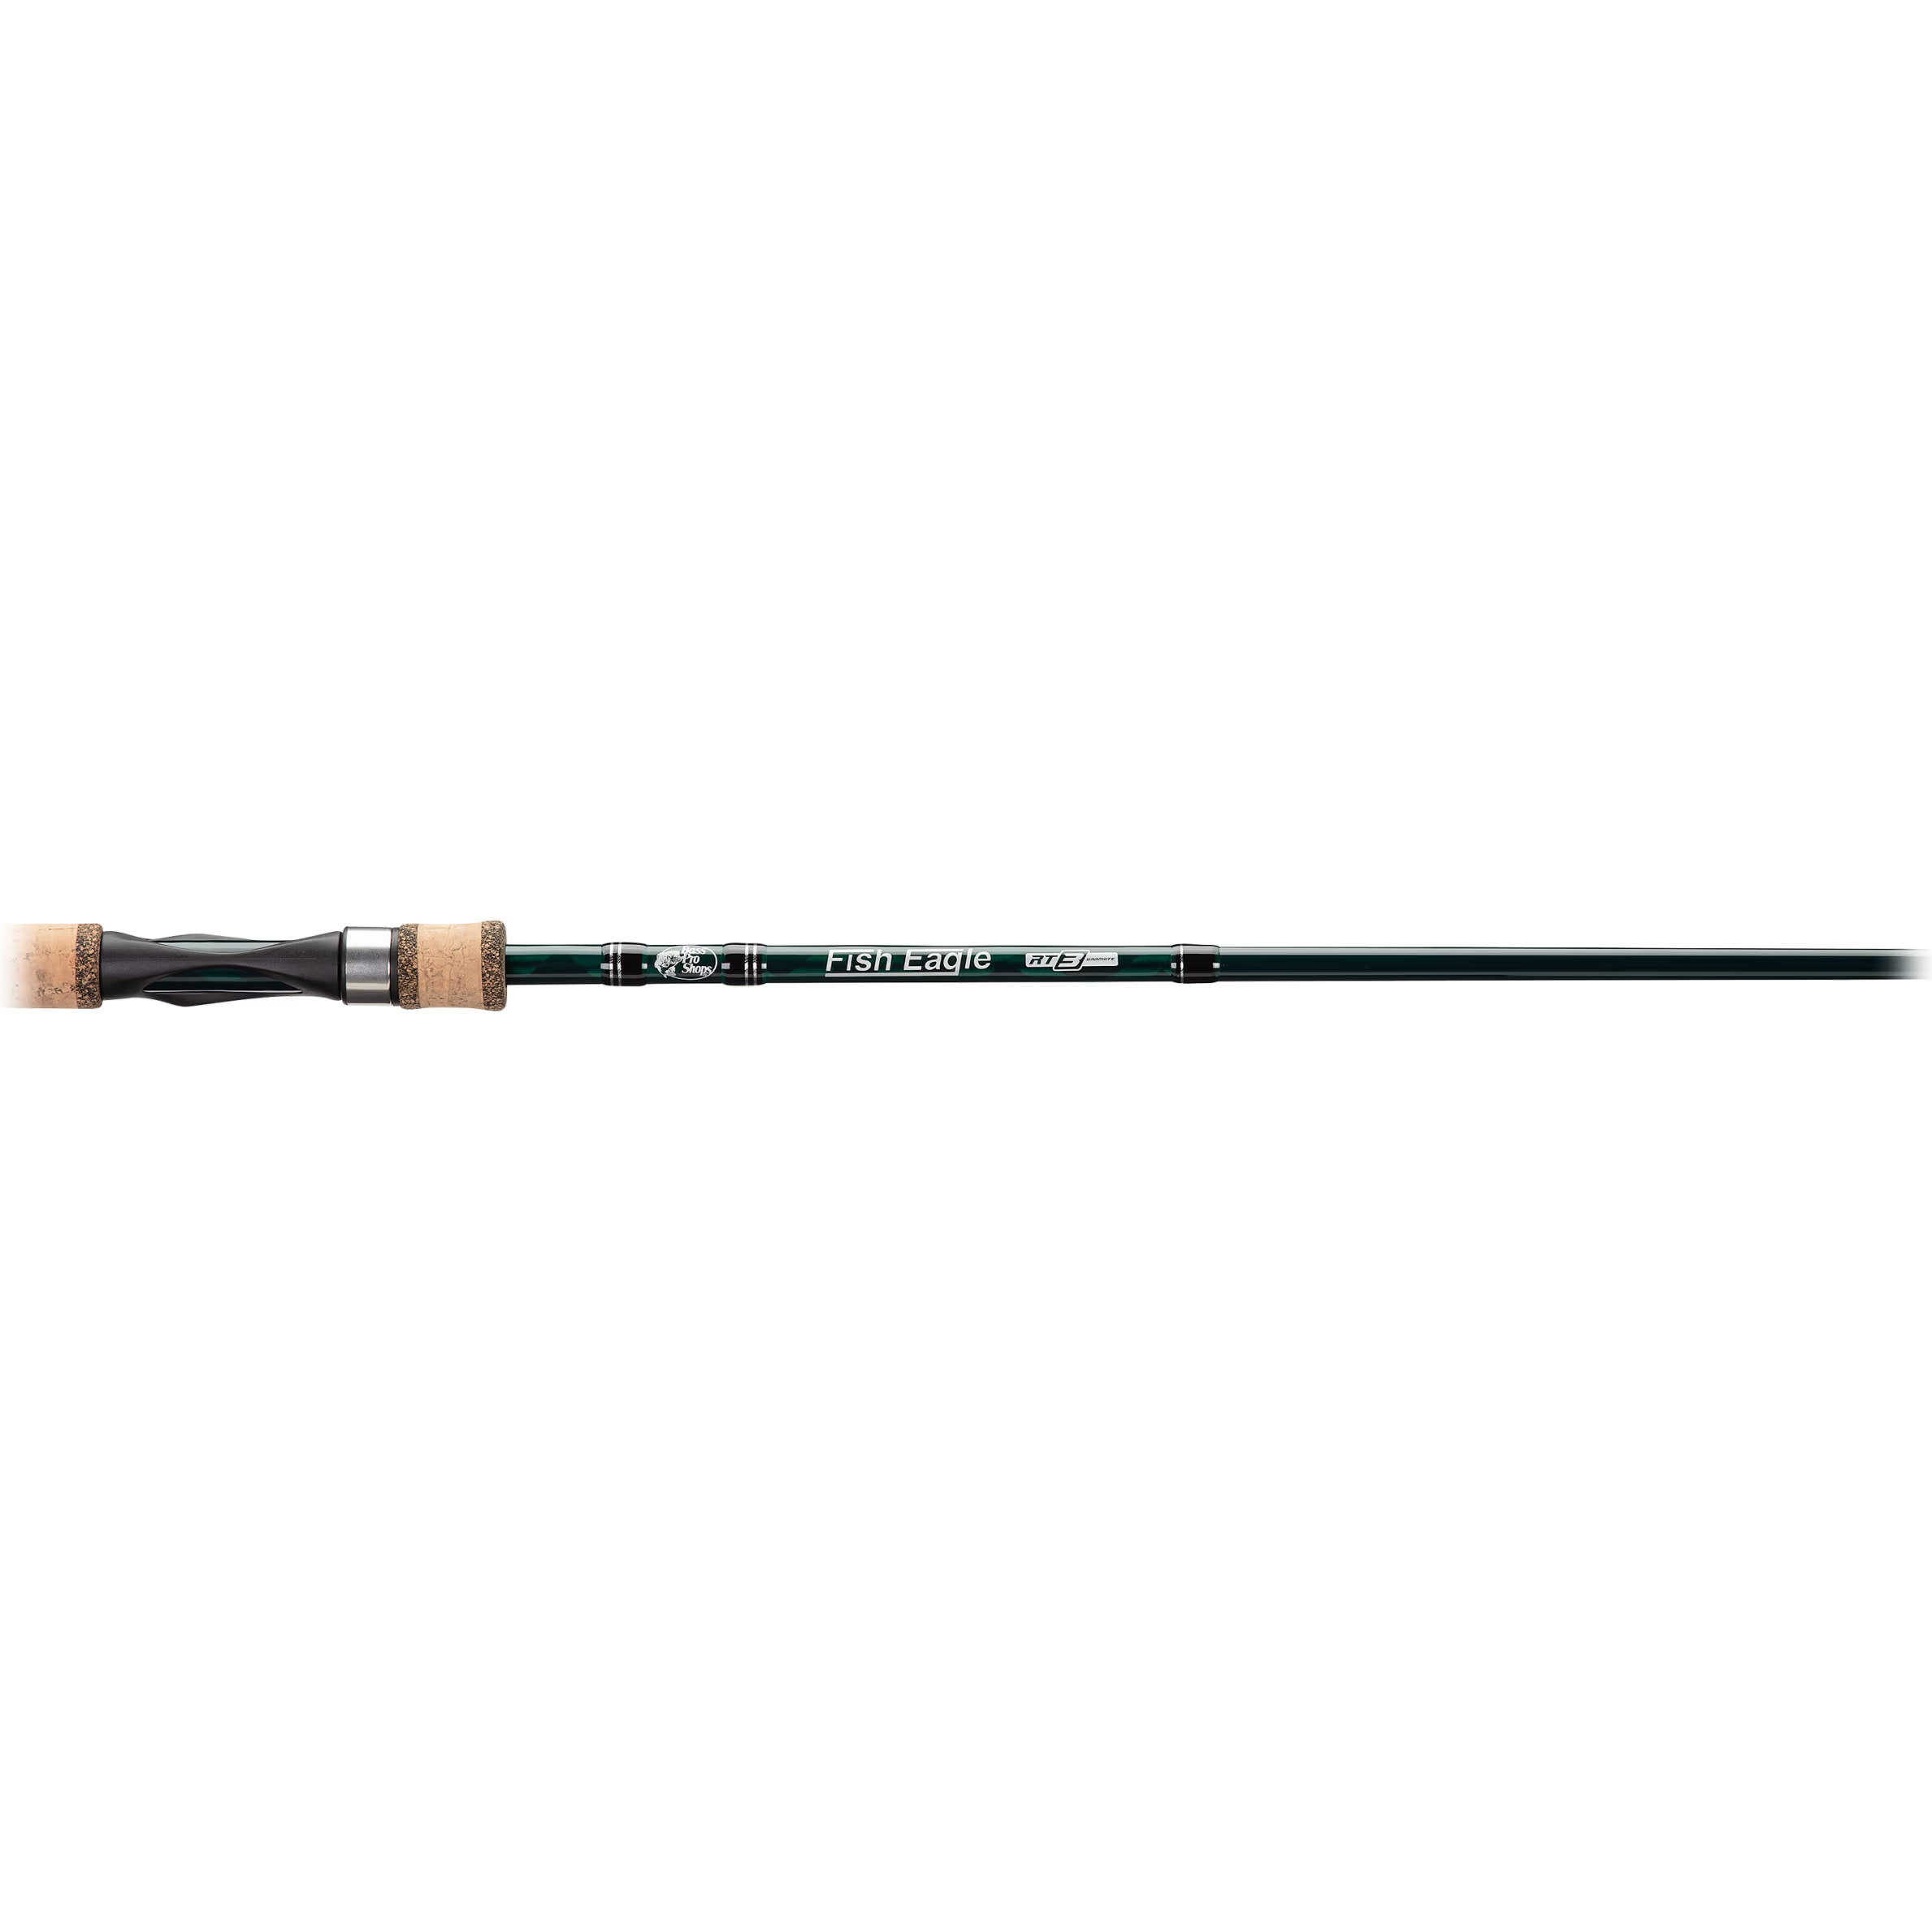 RARE Cabela' Mag Touch Fish Eagle Fishing Rod 5'3 Graphite made